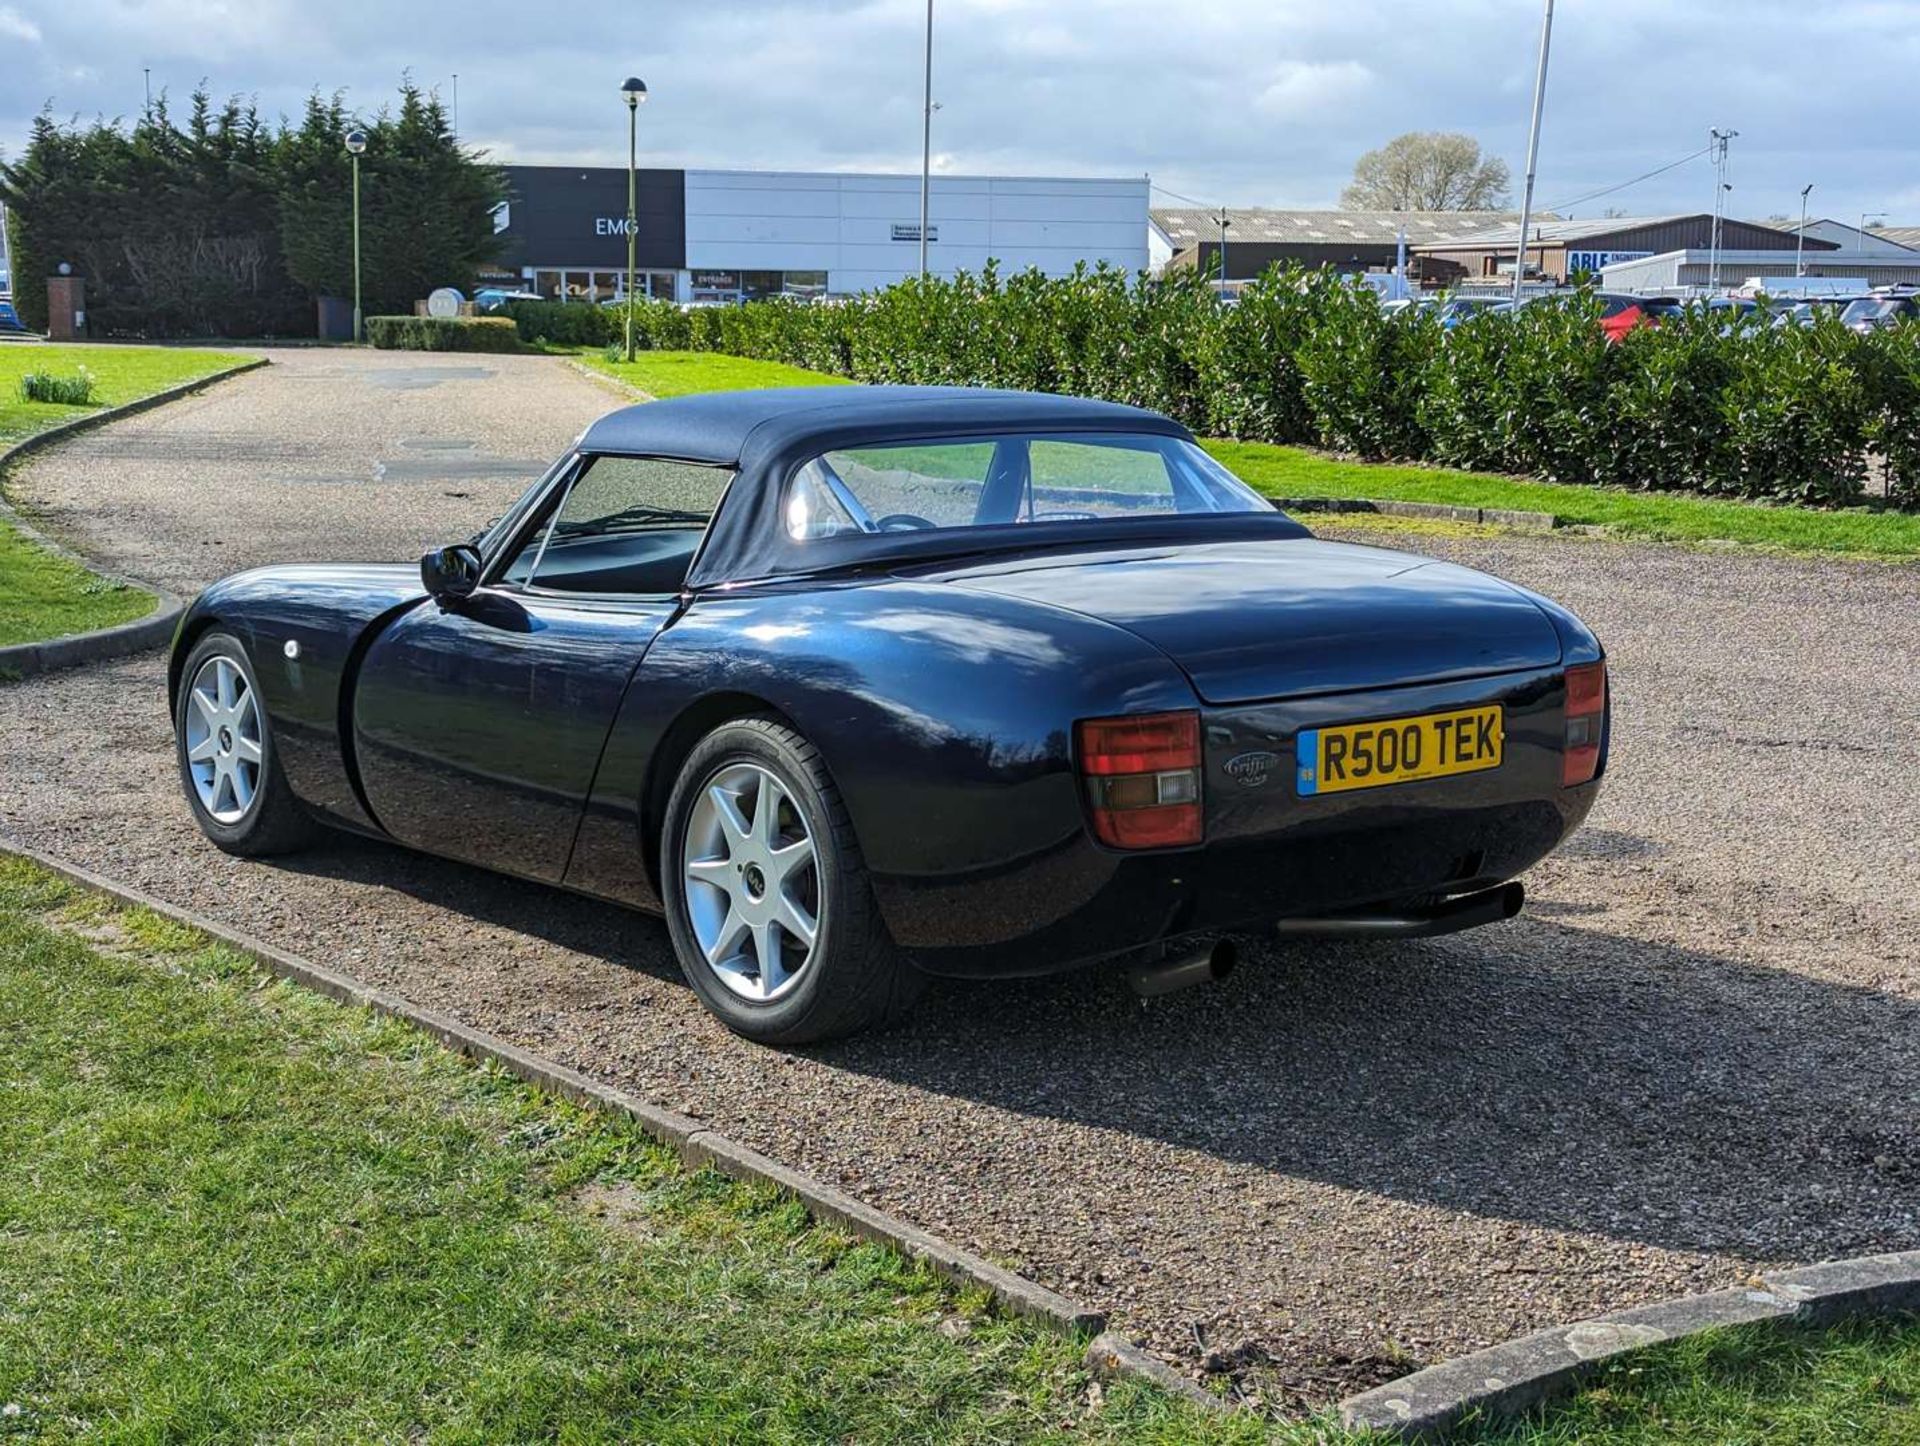 1997 TVR GRIFFITH 5.0 - Image 6 of 29